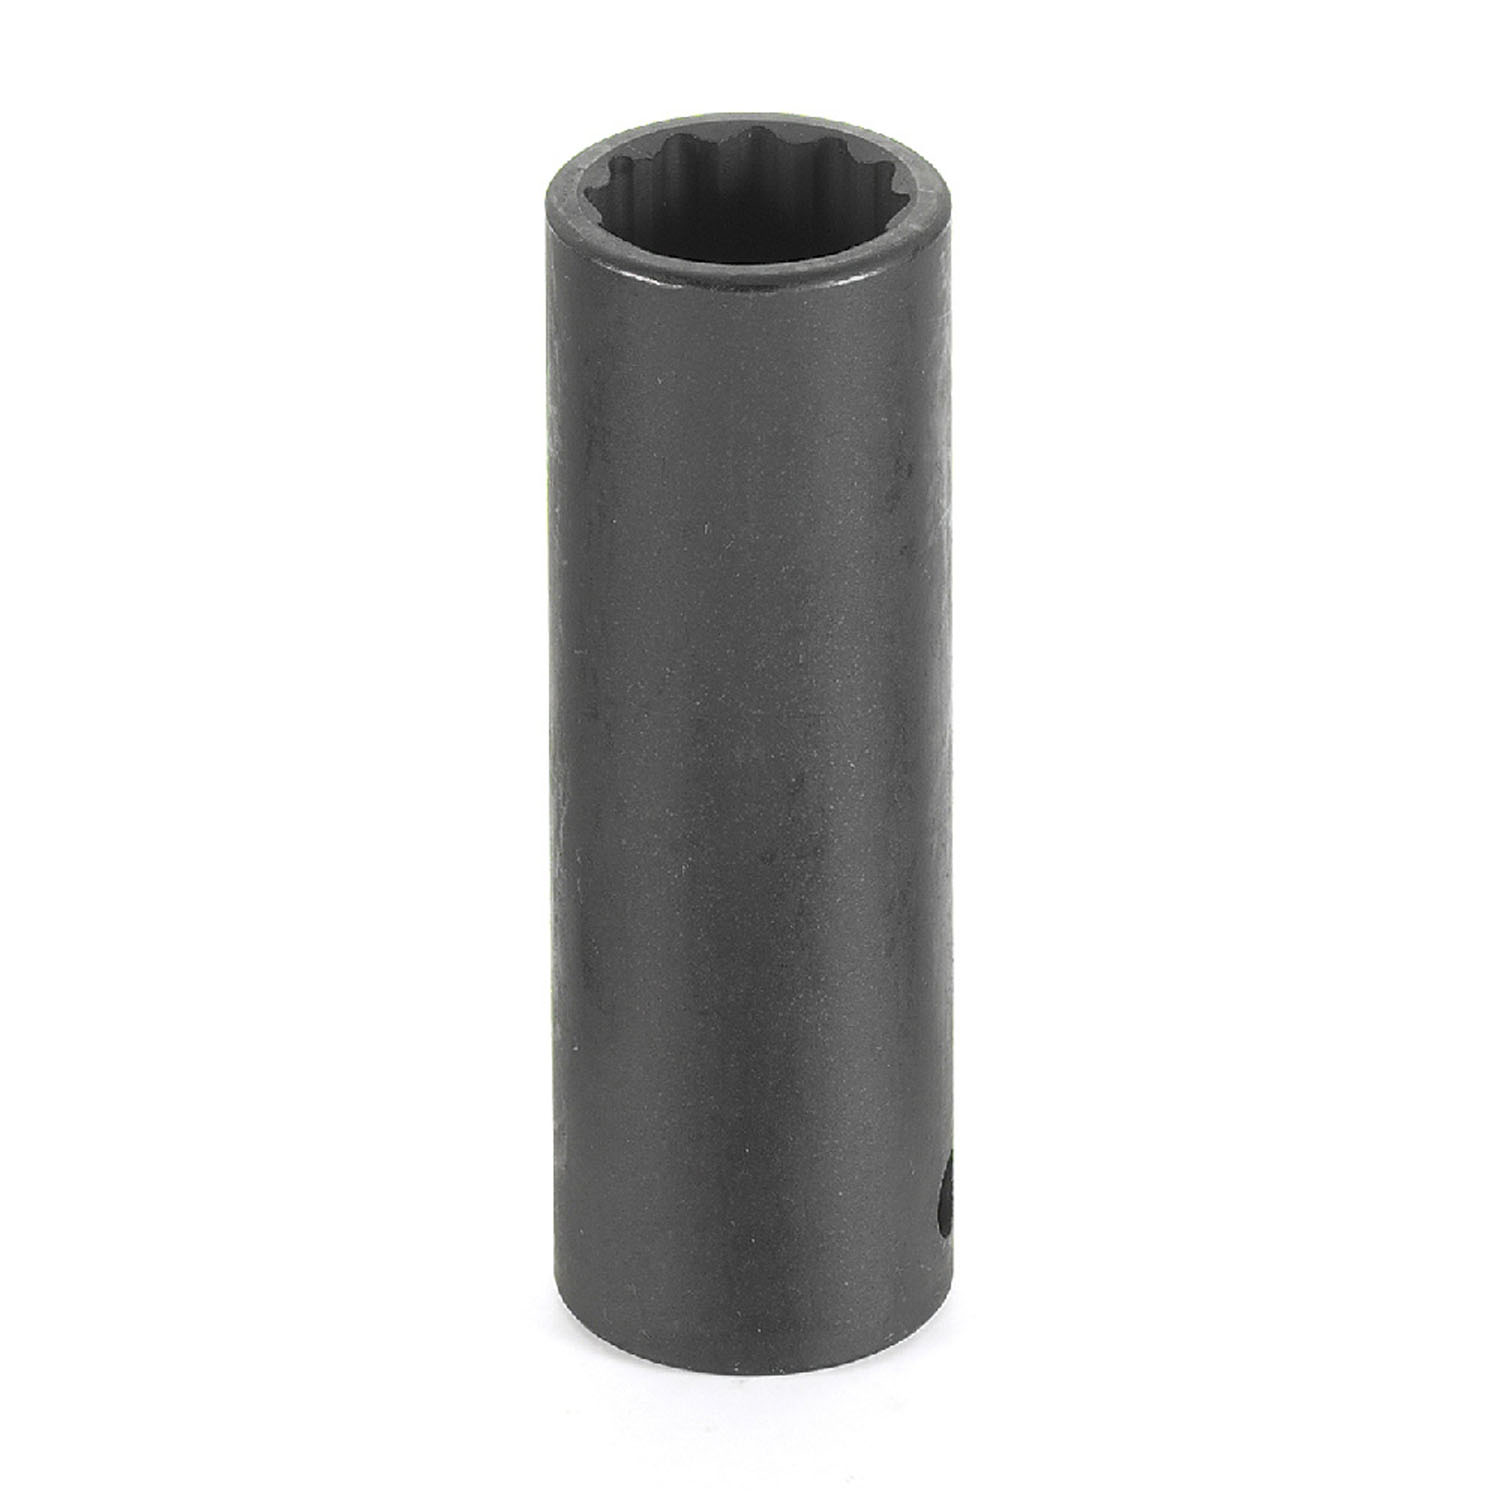 1/2 IN. DRIVE DEEP LENGTH IMPACT 12 POINT SOCKETS (MULTIPLE SIZES AVAILABLE)